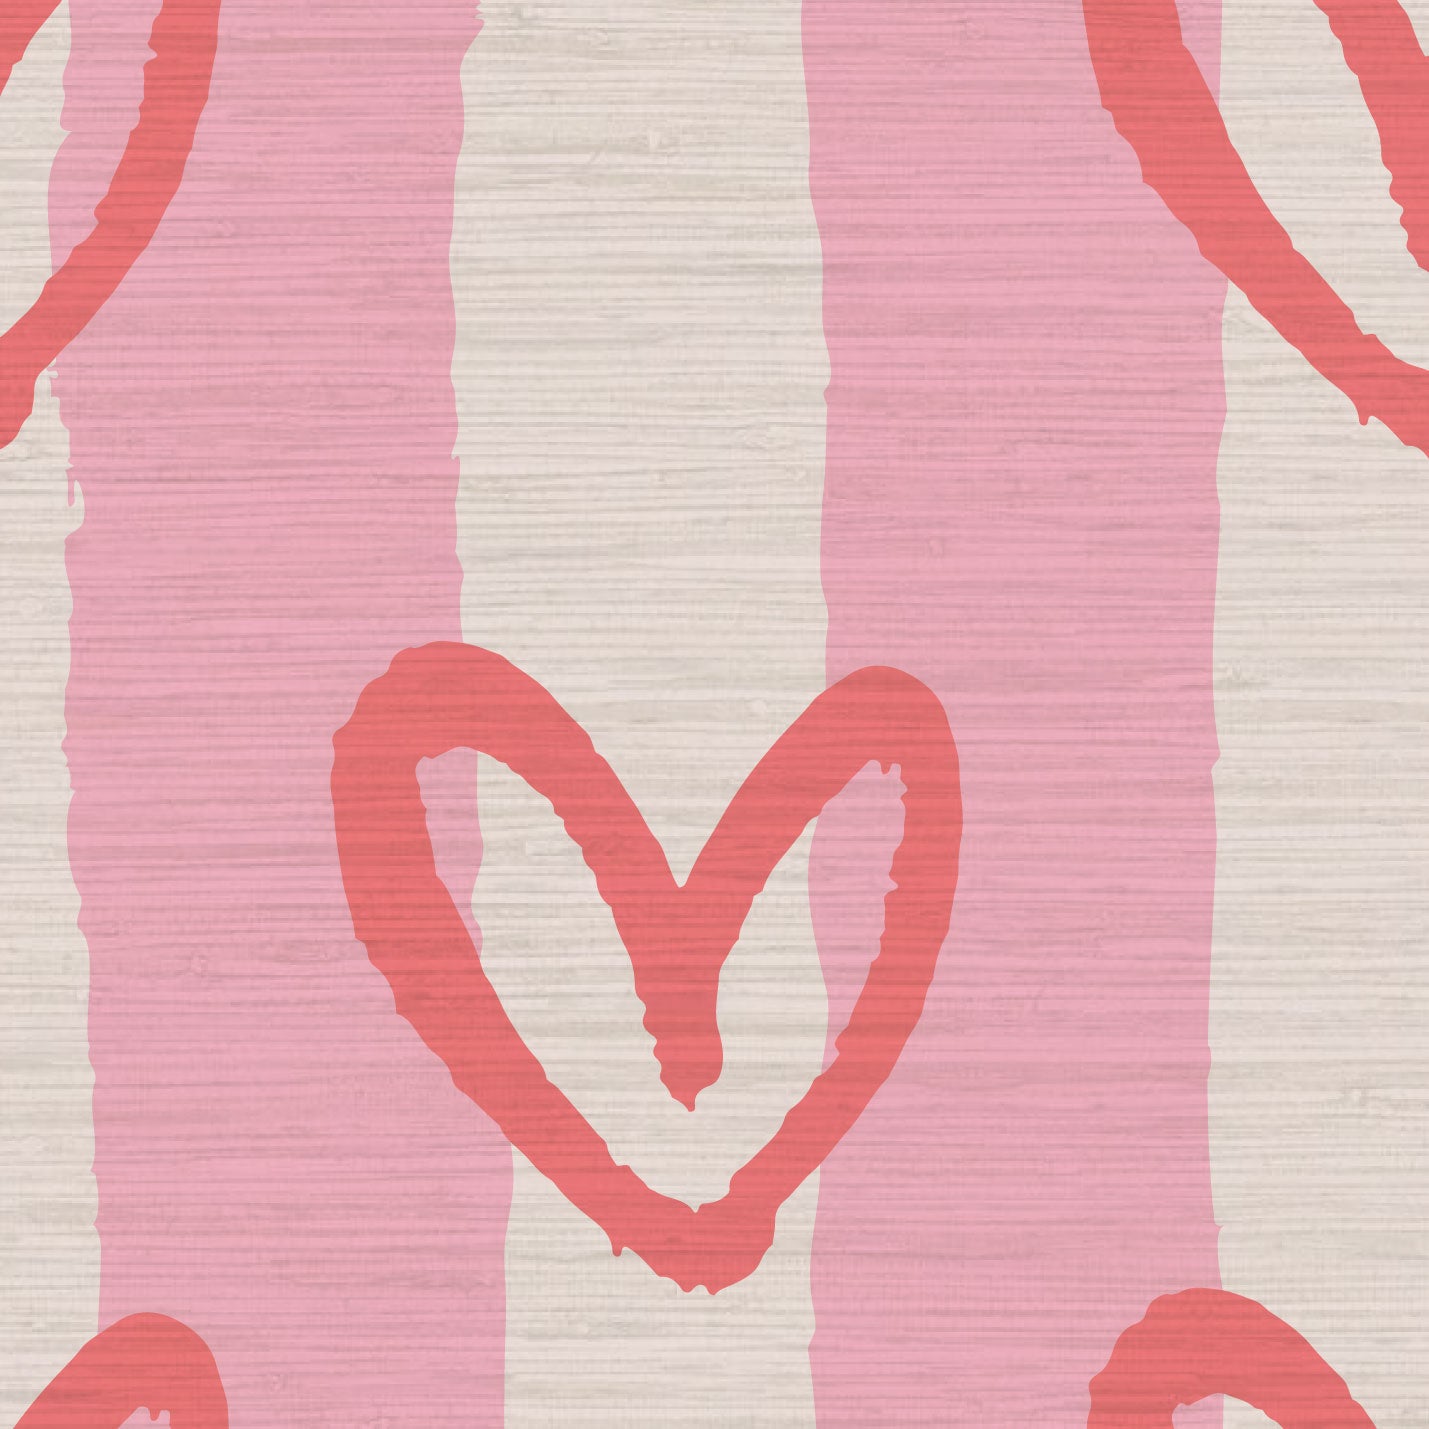 hearts vertical wide stripes house of shan collaboration kids playroom nursery Grasscloth wallpaper Natural Textured Eco-Friendly Non-toxic High-quality  Sustainable Interior Design Bold Custom Tailor-made Retro chic Bold fun pink red white